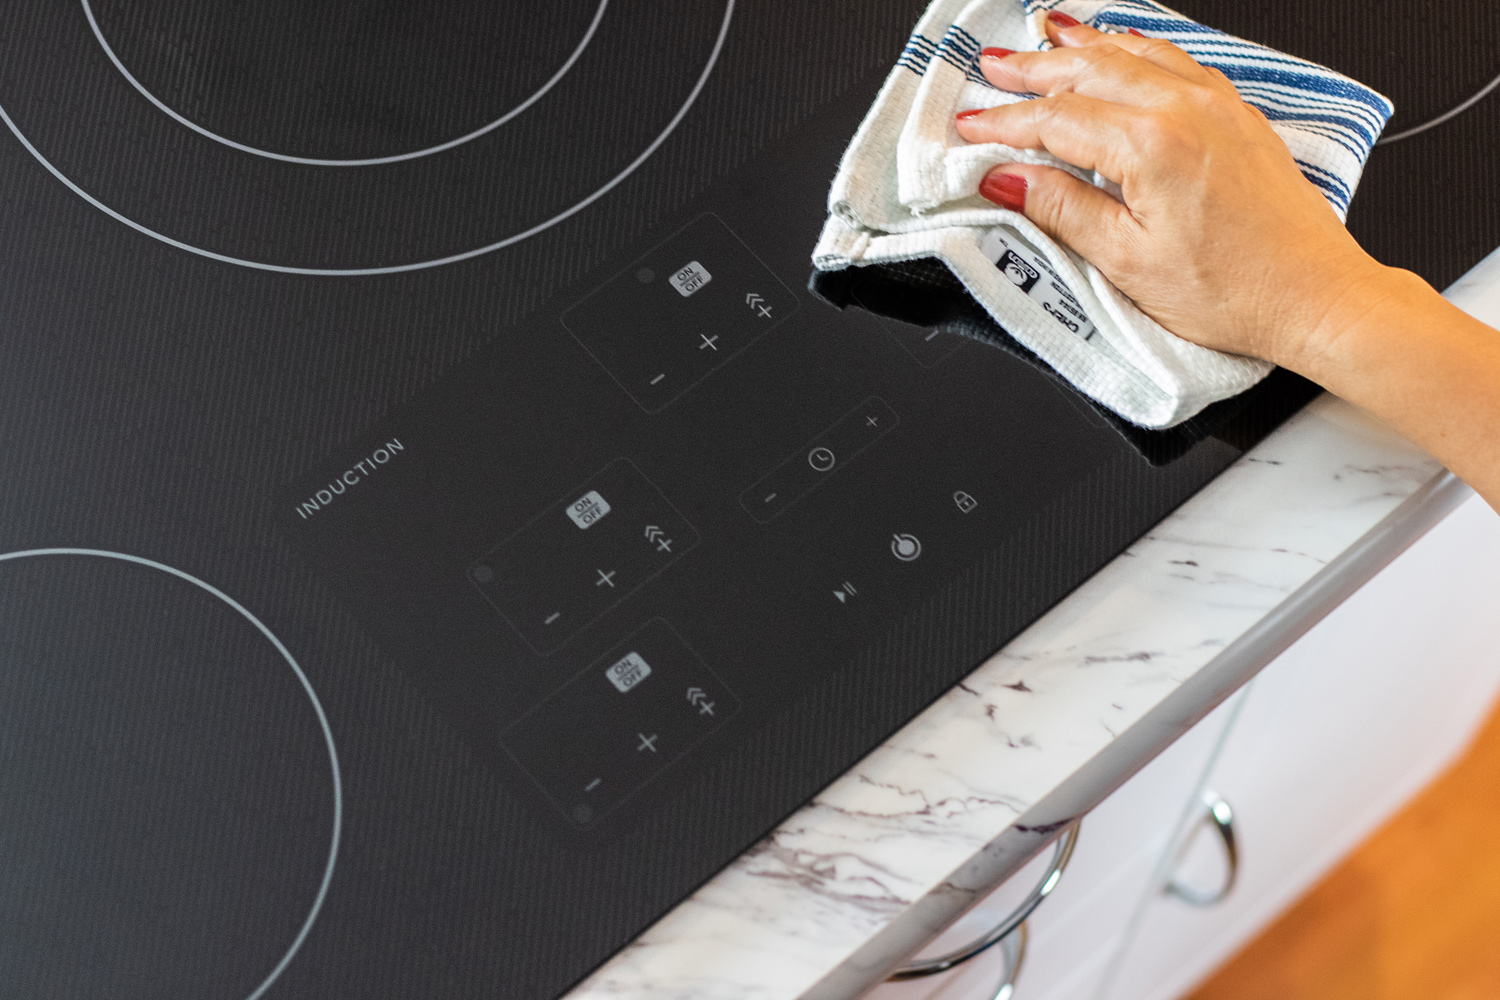 What is an induction stove?